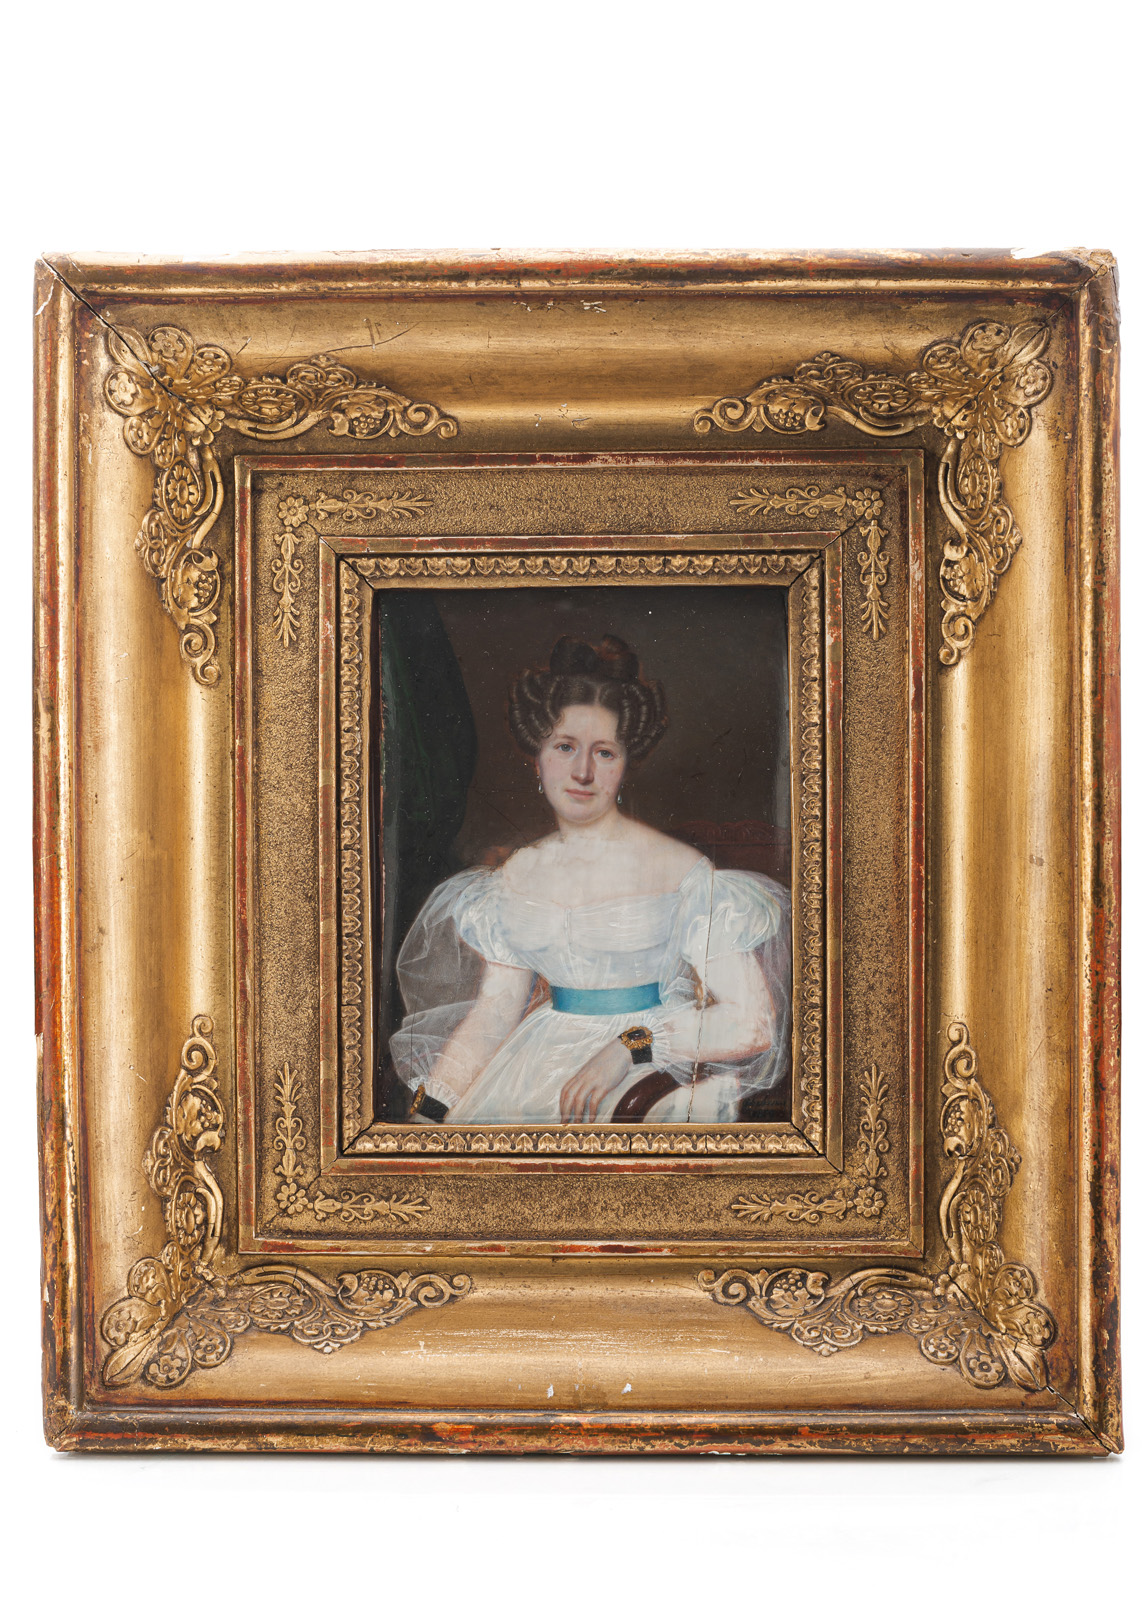 A PORTRAIT MINIATURE OF A YOUNG LADY IN A WHITE DRESS